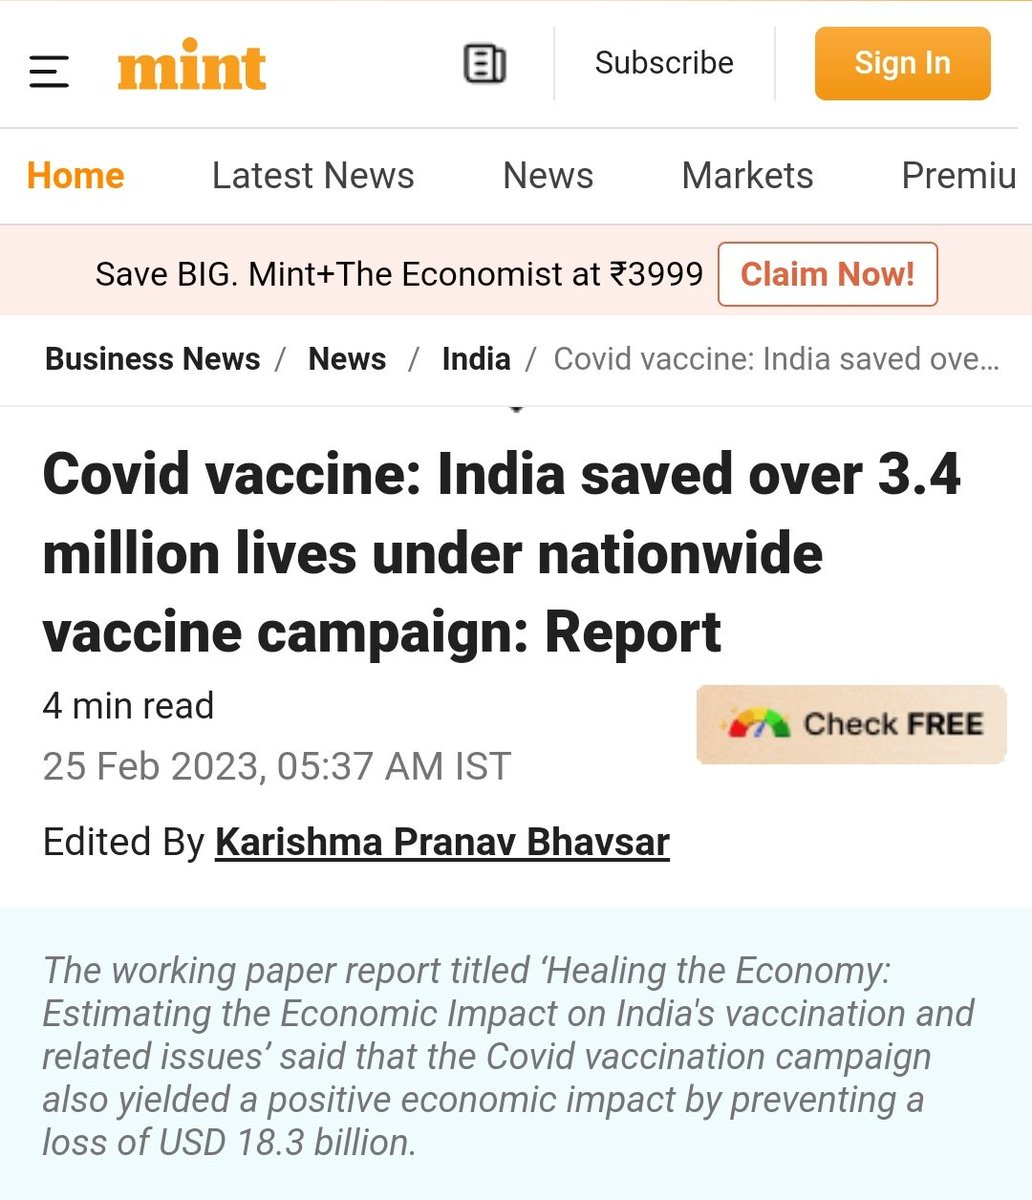 Absolutely! Let's #ArrestNarendraModi for the crime of saving countless lives through an unprecedented vaccine campaign. The sheer scale of which was unseen anywhere in the world. To carry out the logistics of providing vaccines to 130 crore people, a task seemingly impossible